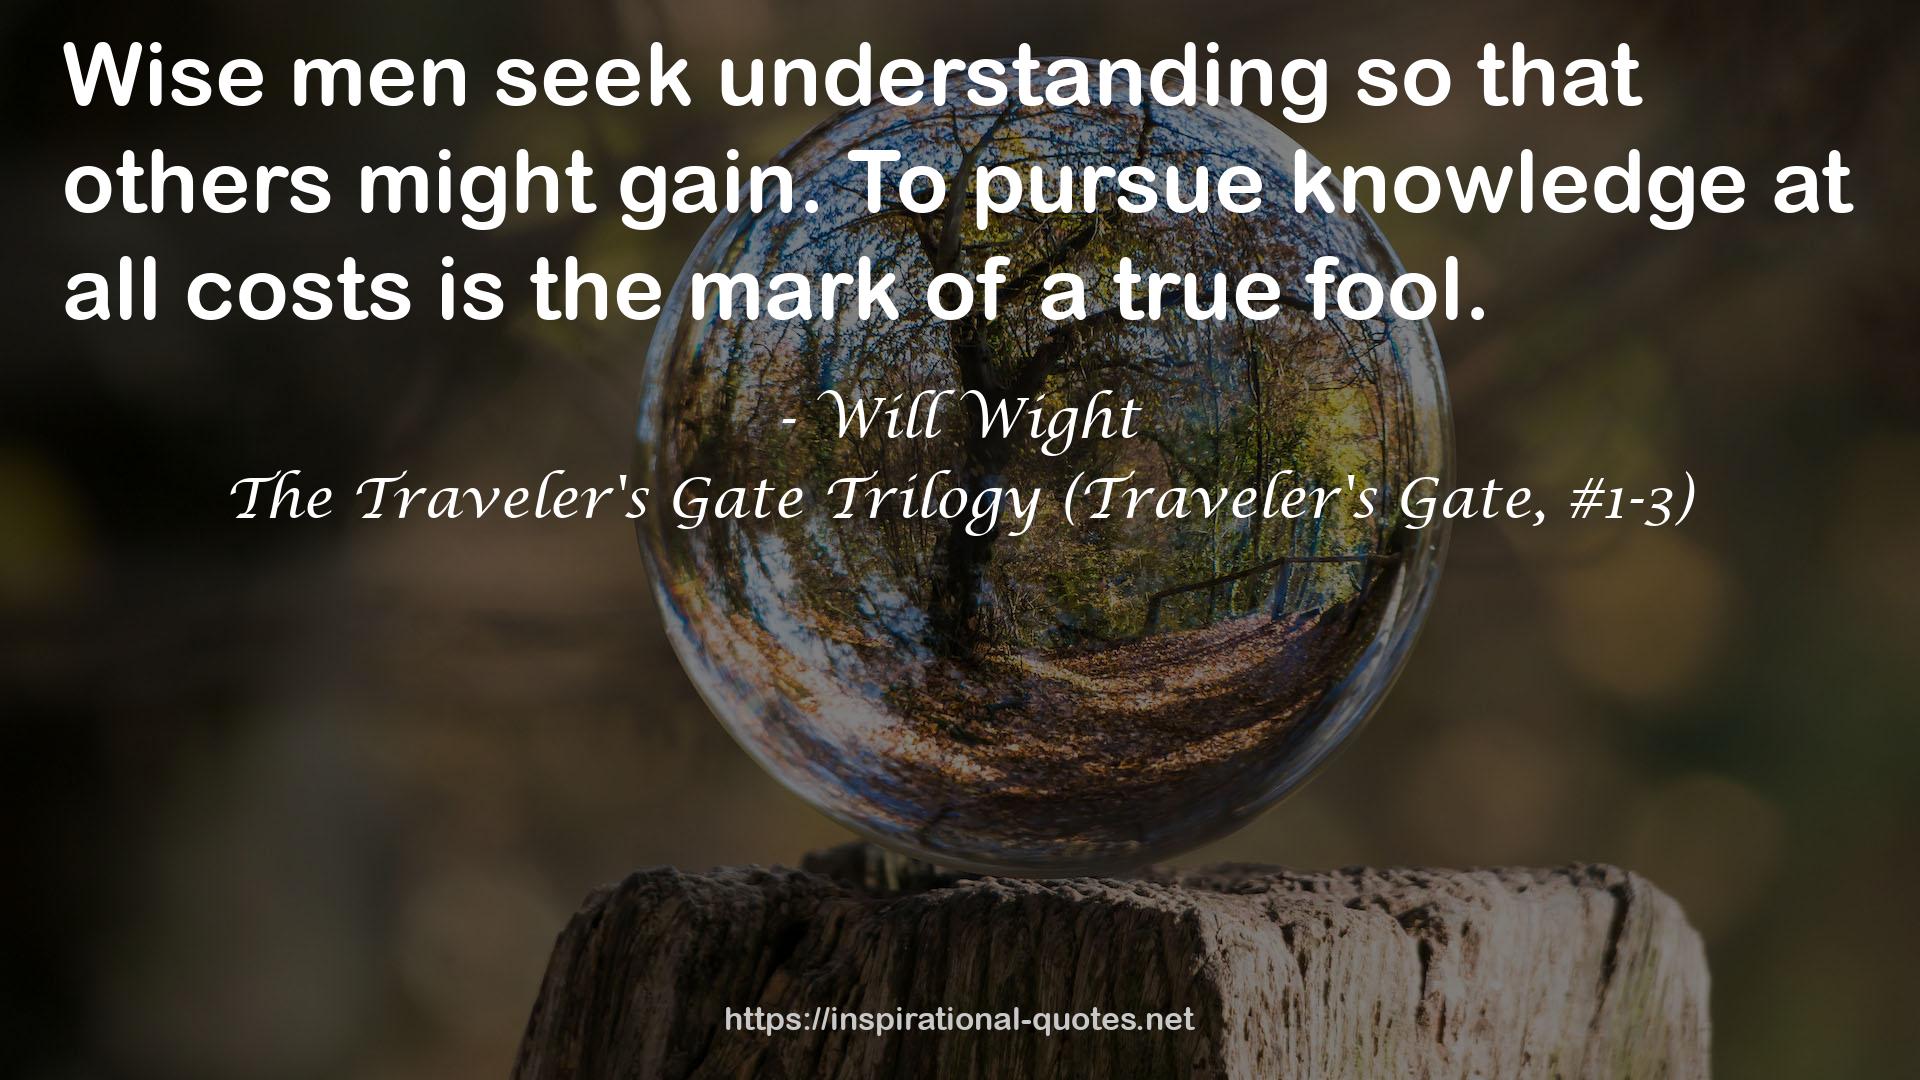 The Traveler's Gate Trilogy (Traveler's Gate, #1-3) QUOTES